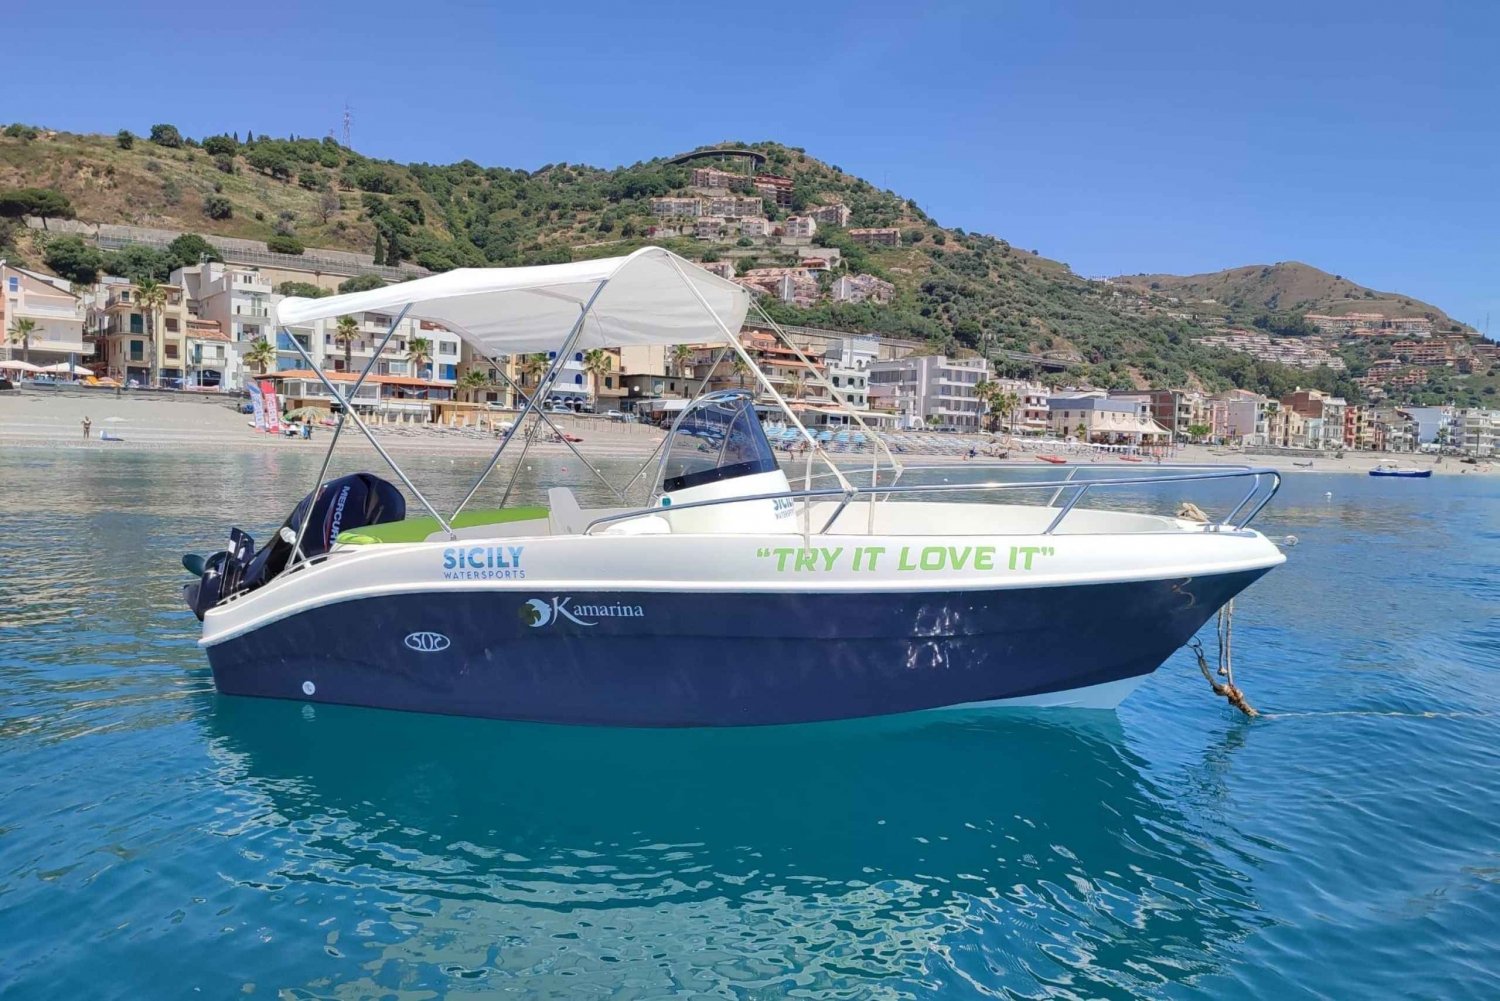 Letojanni: Boat Rental without a License